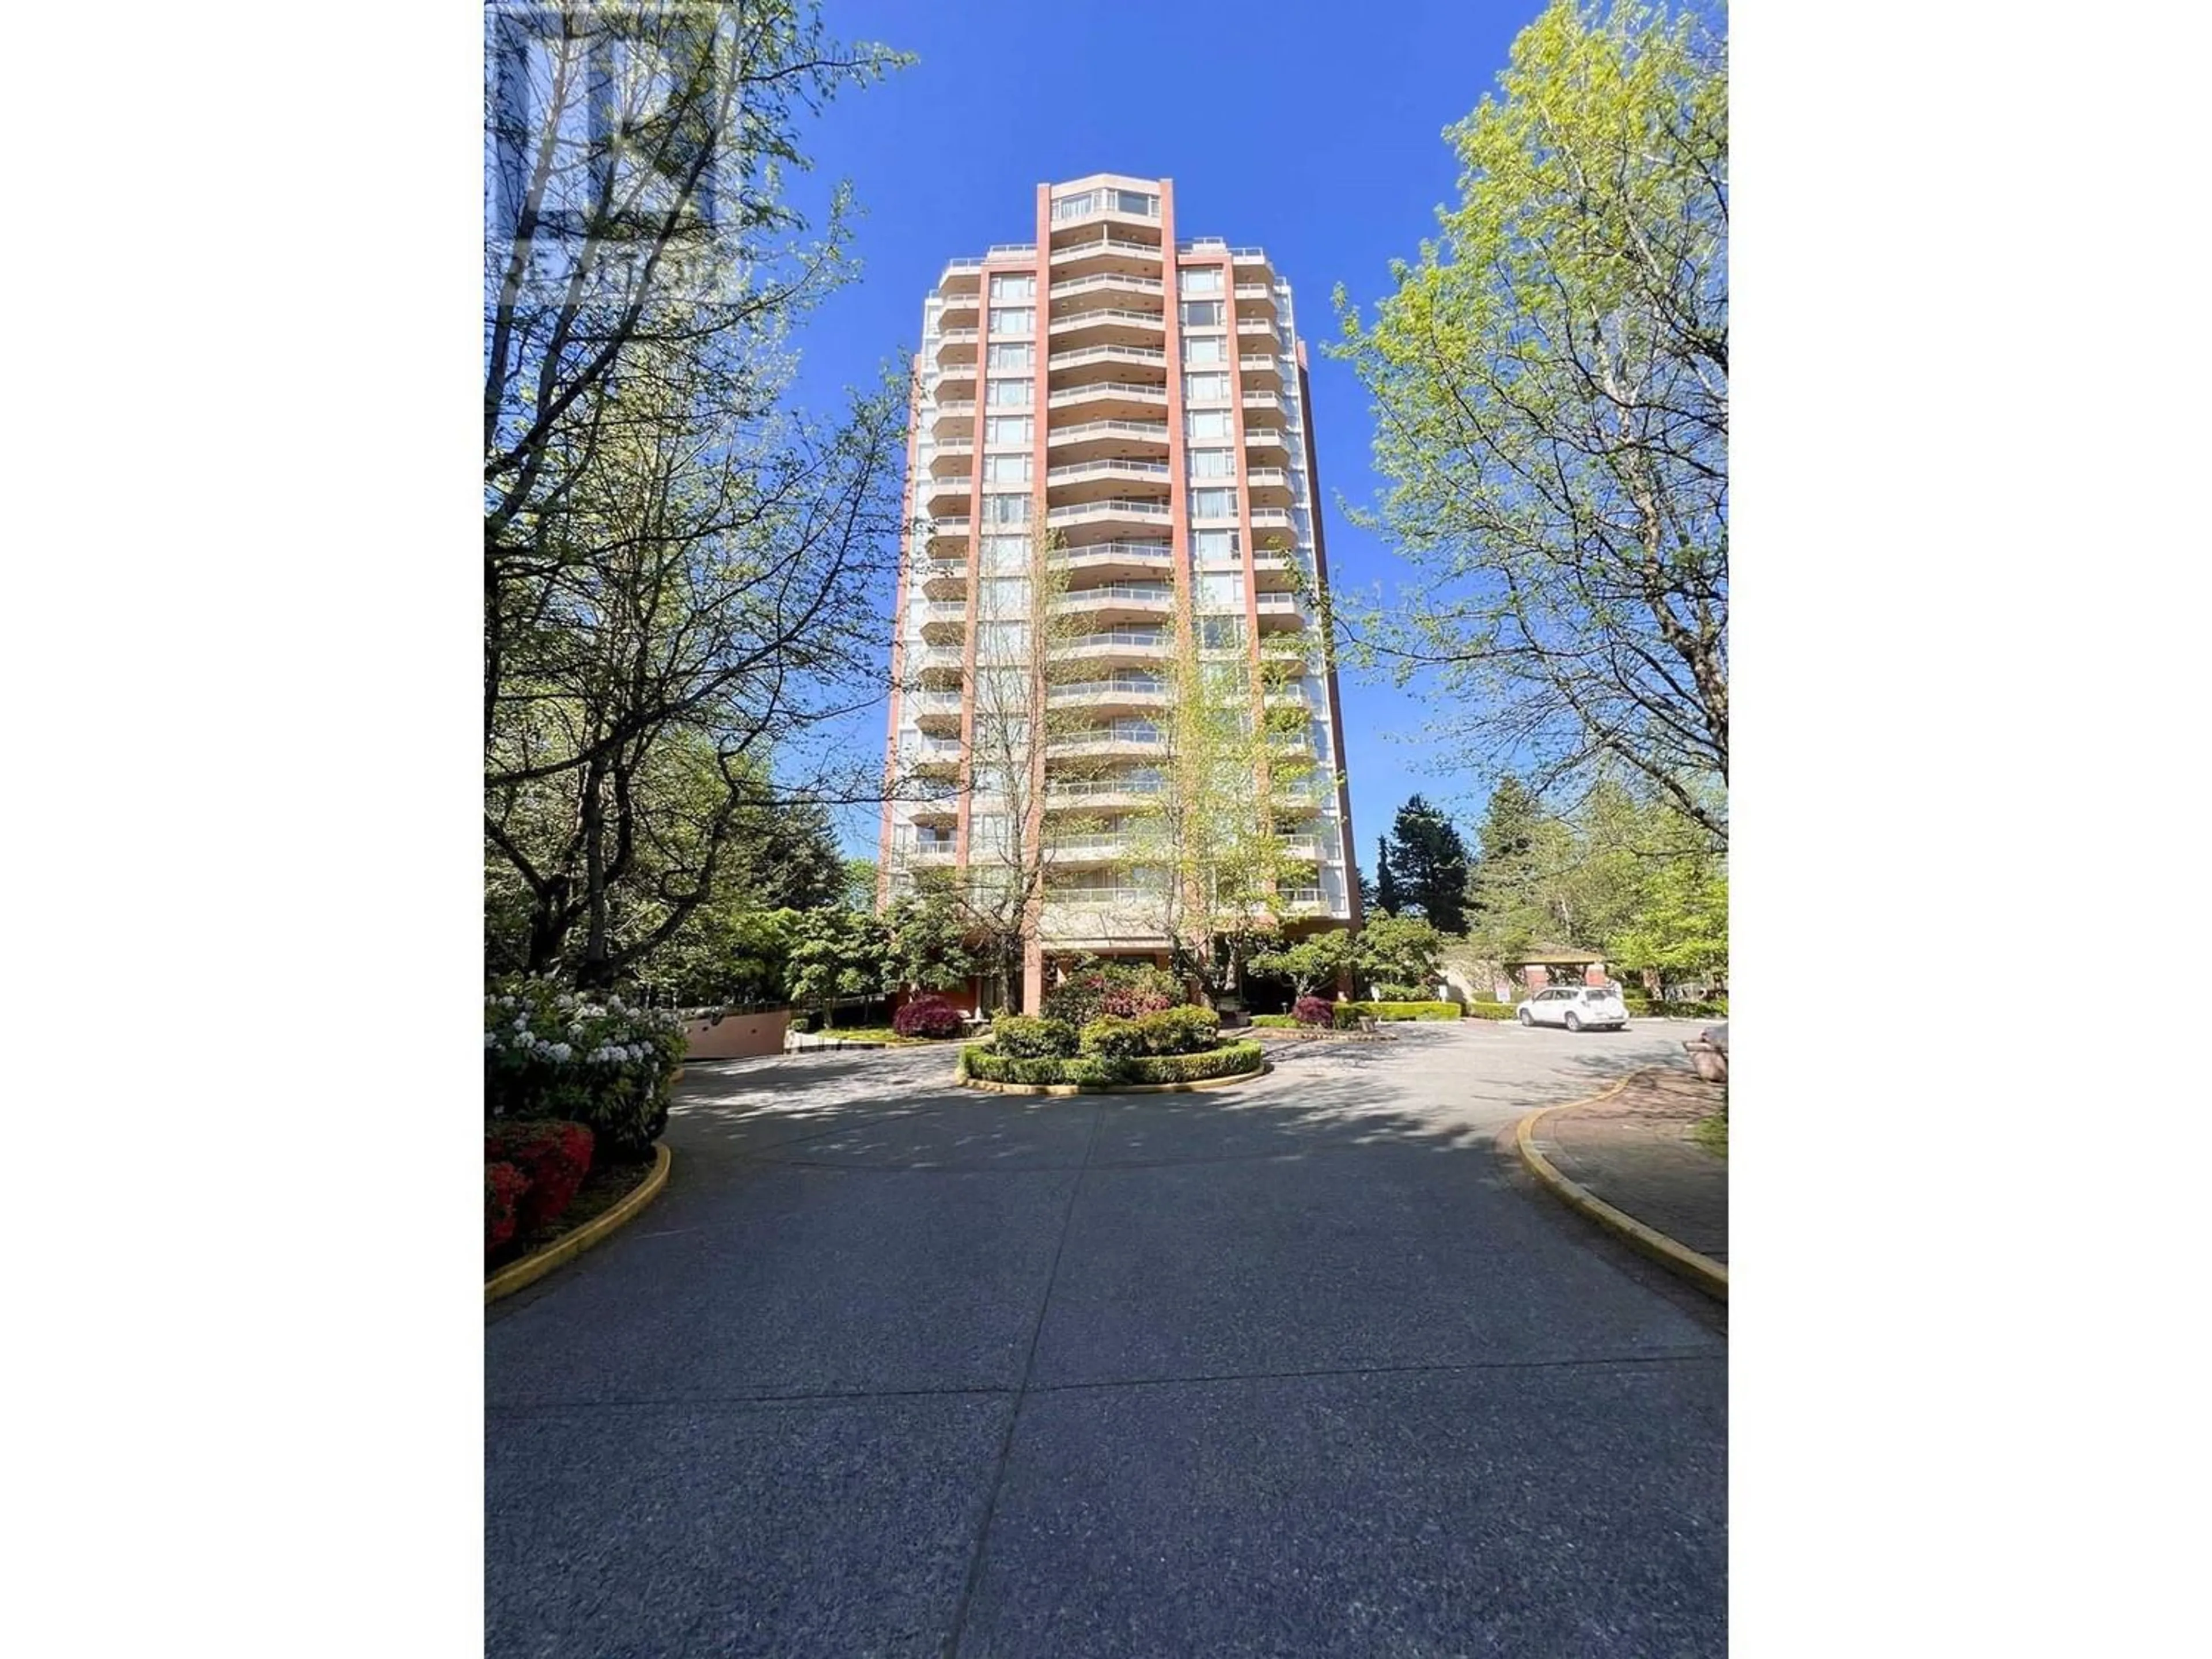 A pic from exterior of the house or condo for 1304 4657 HAZEL STREET, Burnaby British Columbia V5H4R2